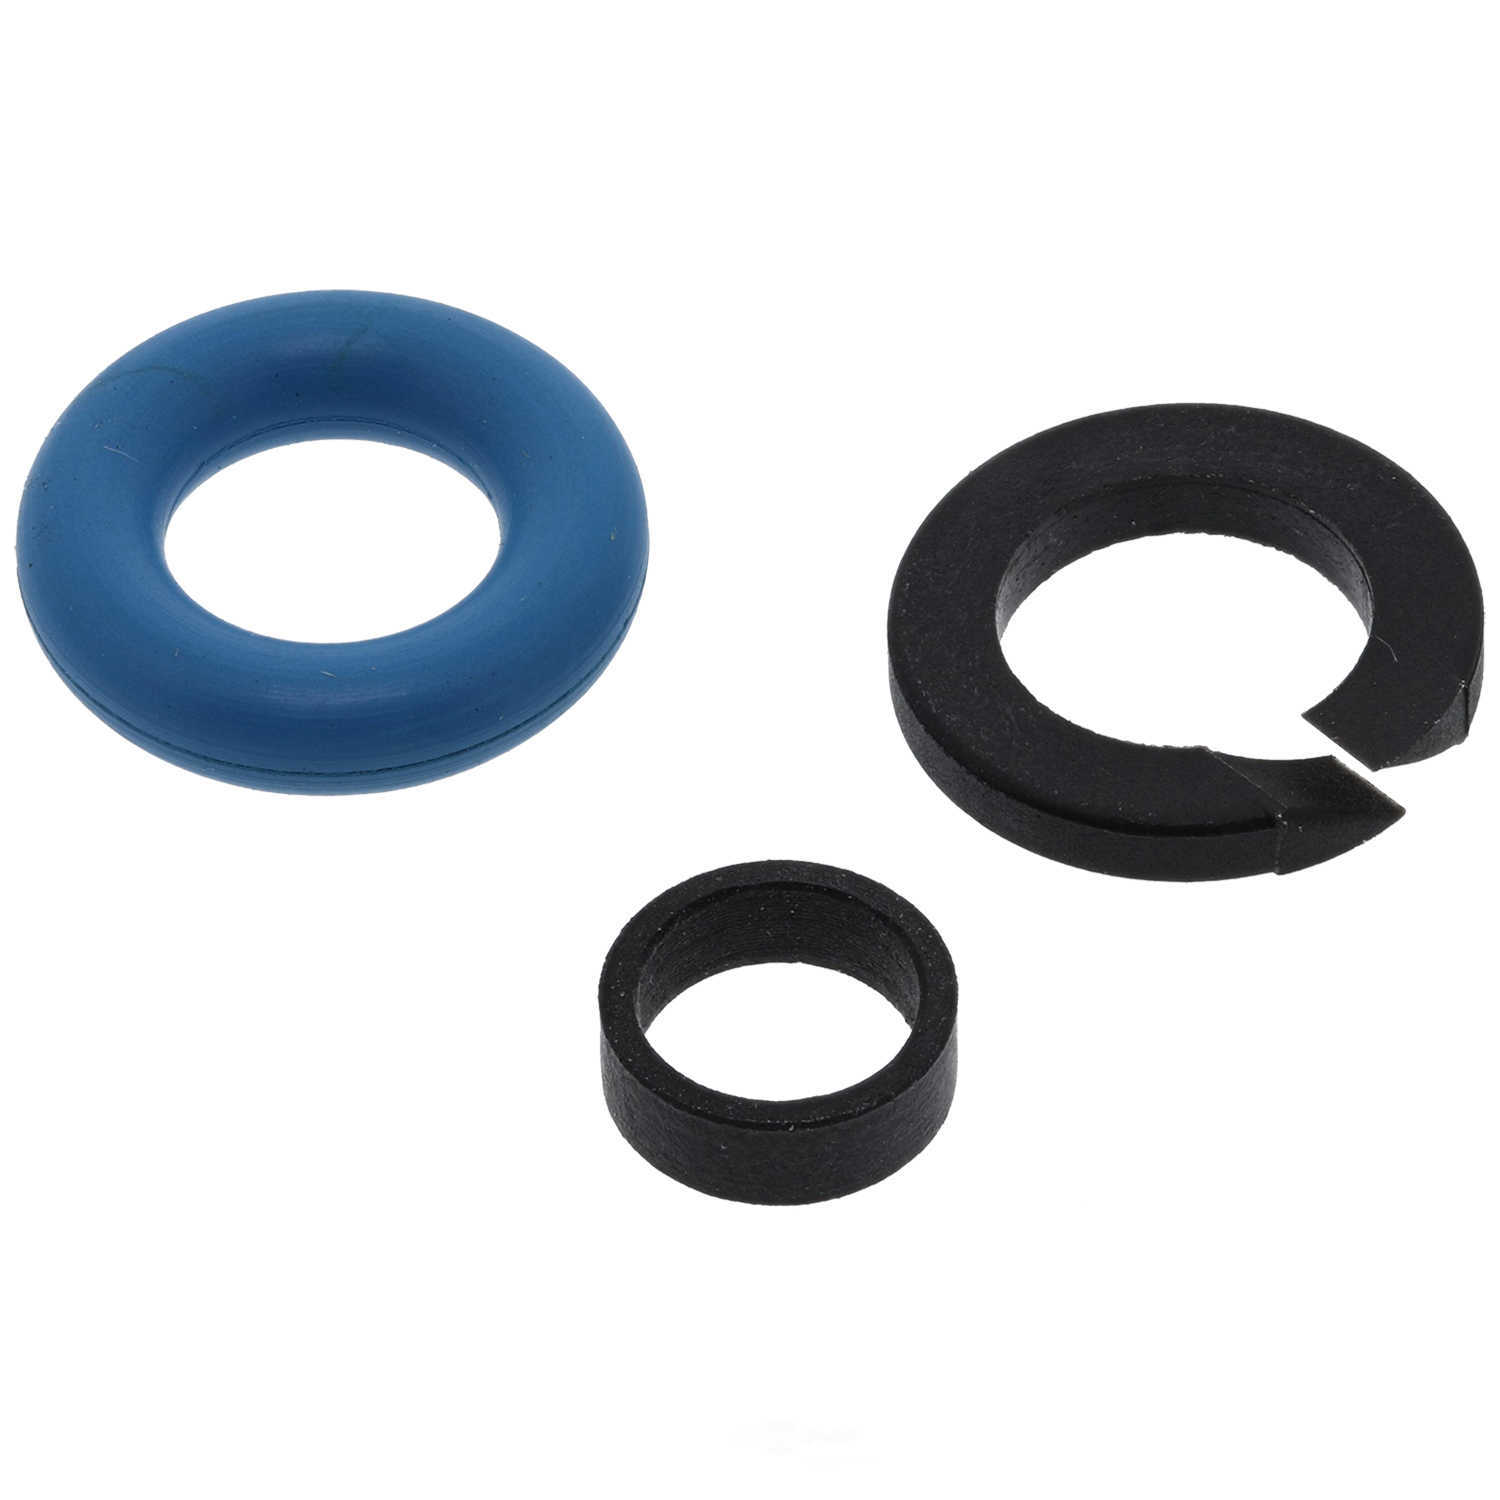 GB REMANUFACTURING INC. - Fuel Injector Seal Kit - GBR 8-062